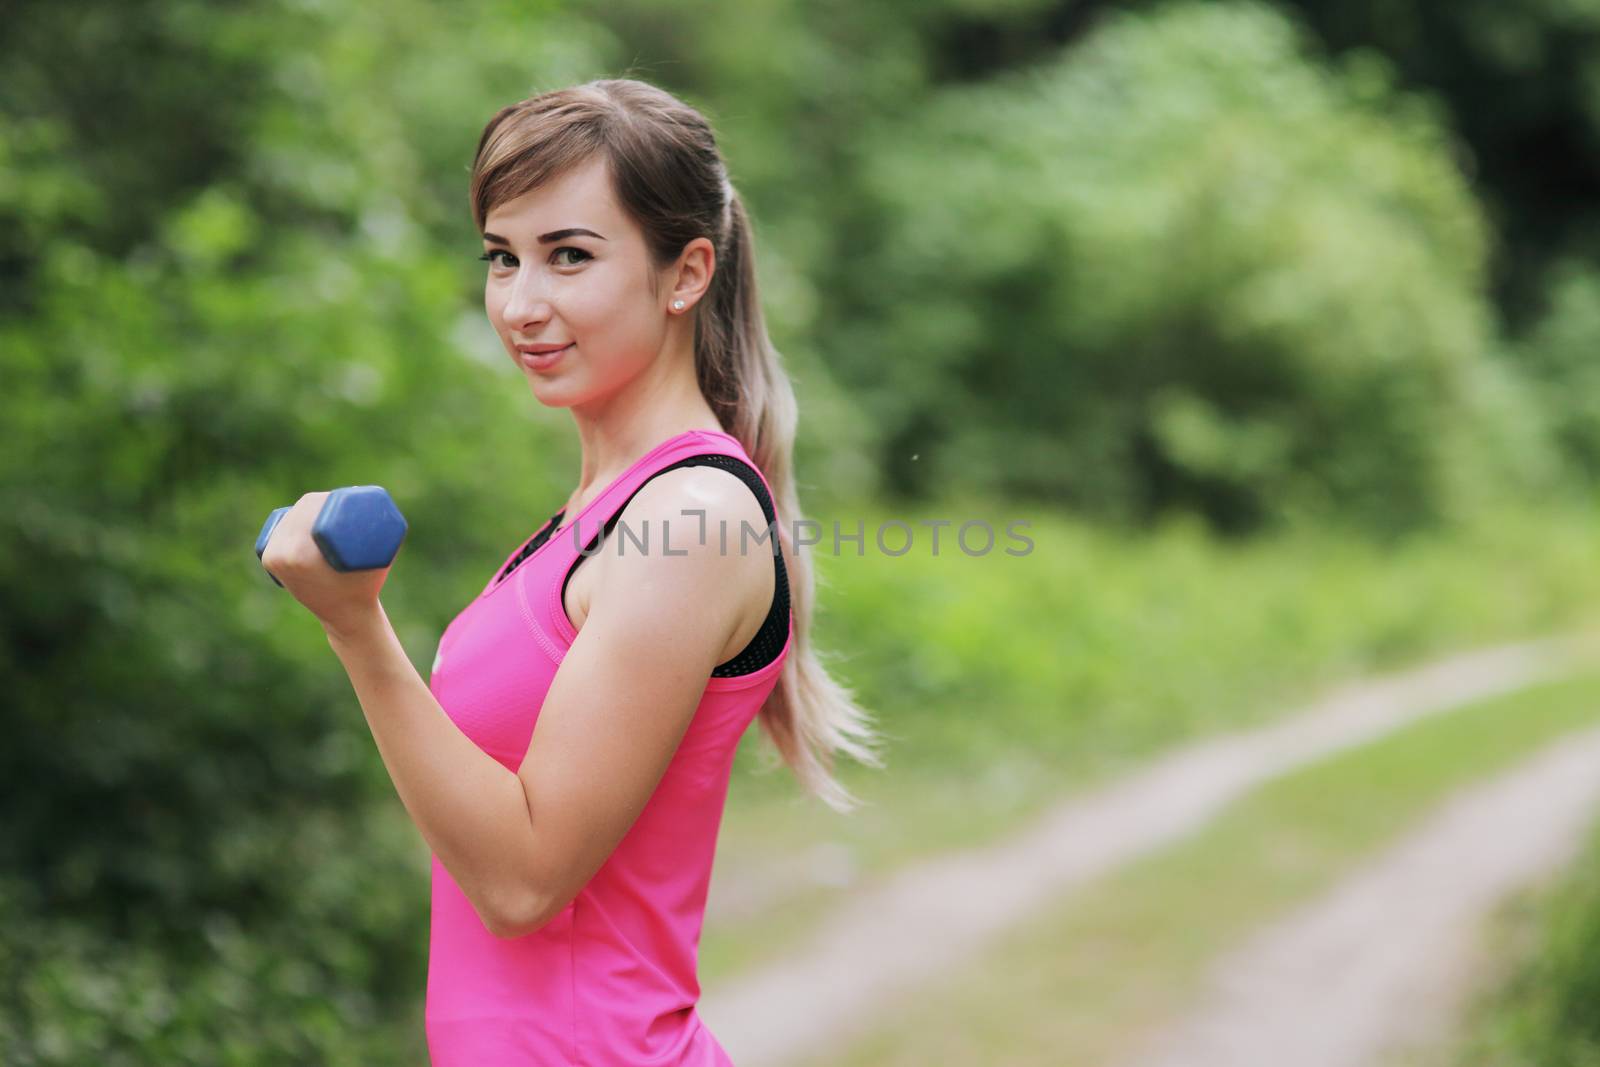 The girl is engaged in sports with weights in nature forest. Motivation healthy fit living. Running shoe of the person running in nature with beautiful sunlight. Woman warming up before running